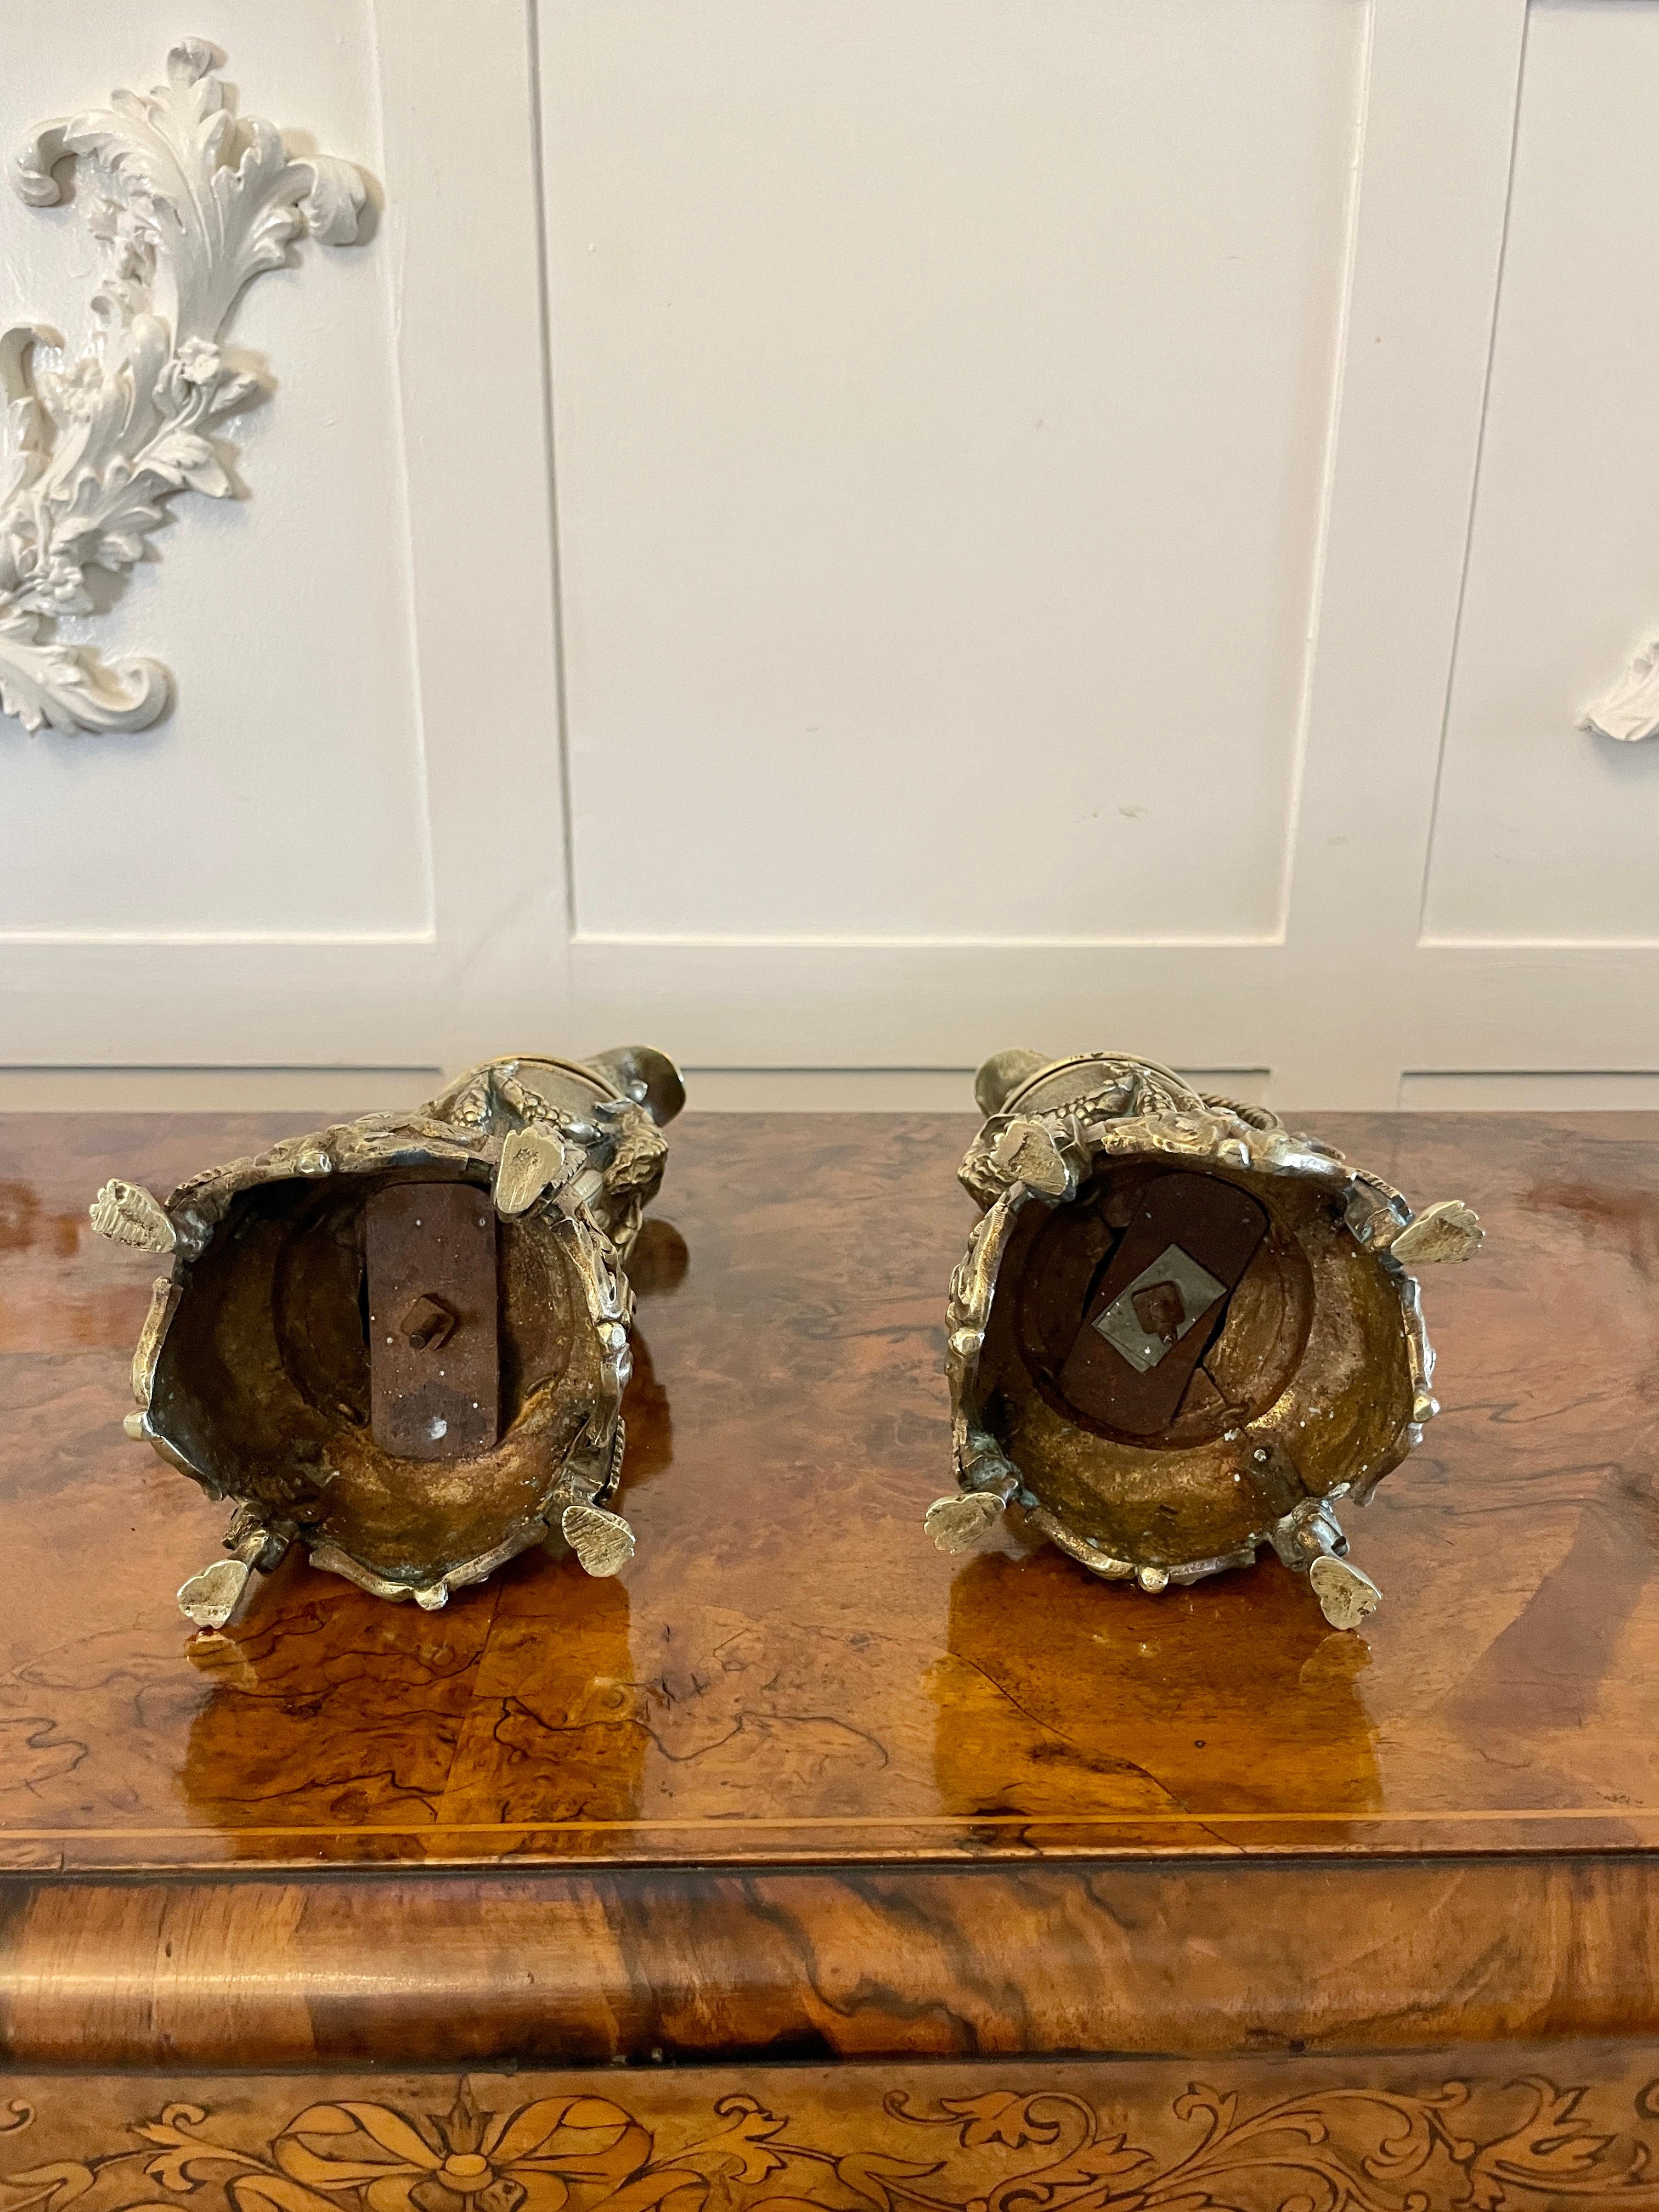 Pair of antique Victorian quality ornate brass Ewers Having quality brass foliate decoration unusual shaped handles ornate swags standing on ornate bases with claw feet


A highly decorative pair in lovely original condition


Dimensions:
Height 